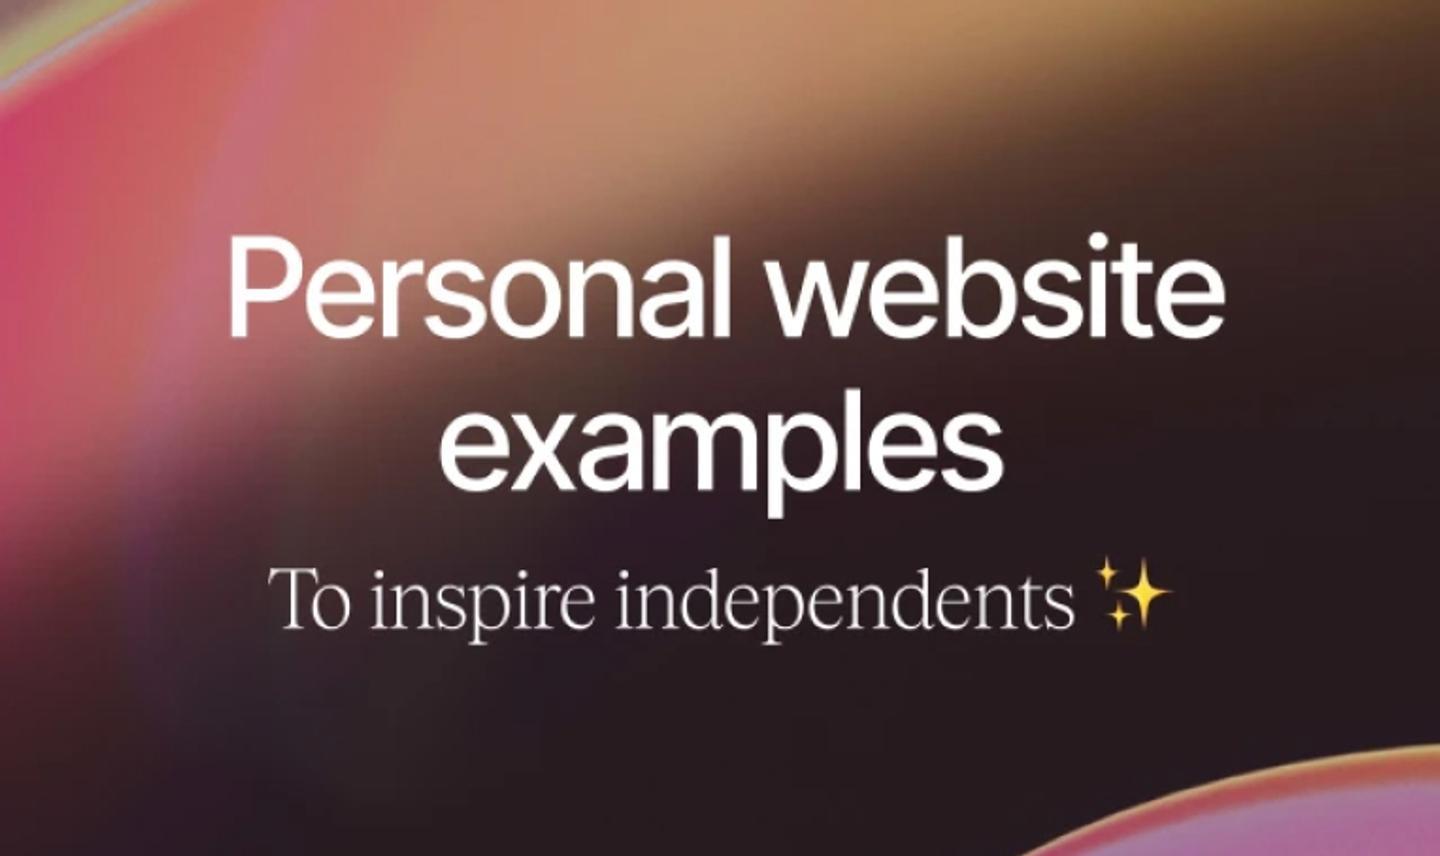 Personal website examples